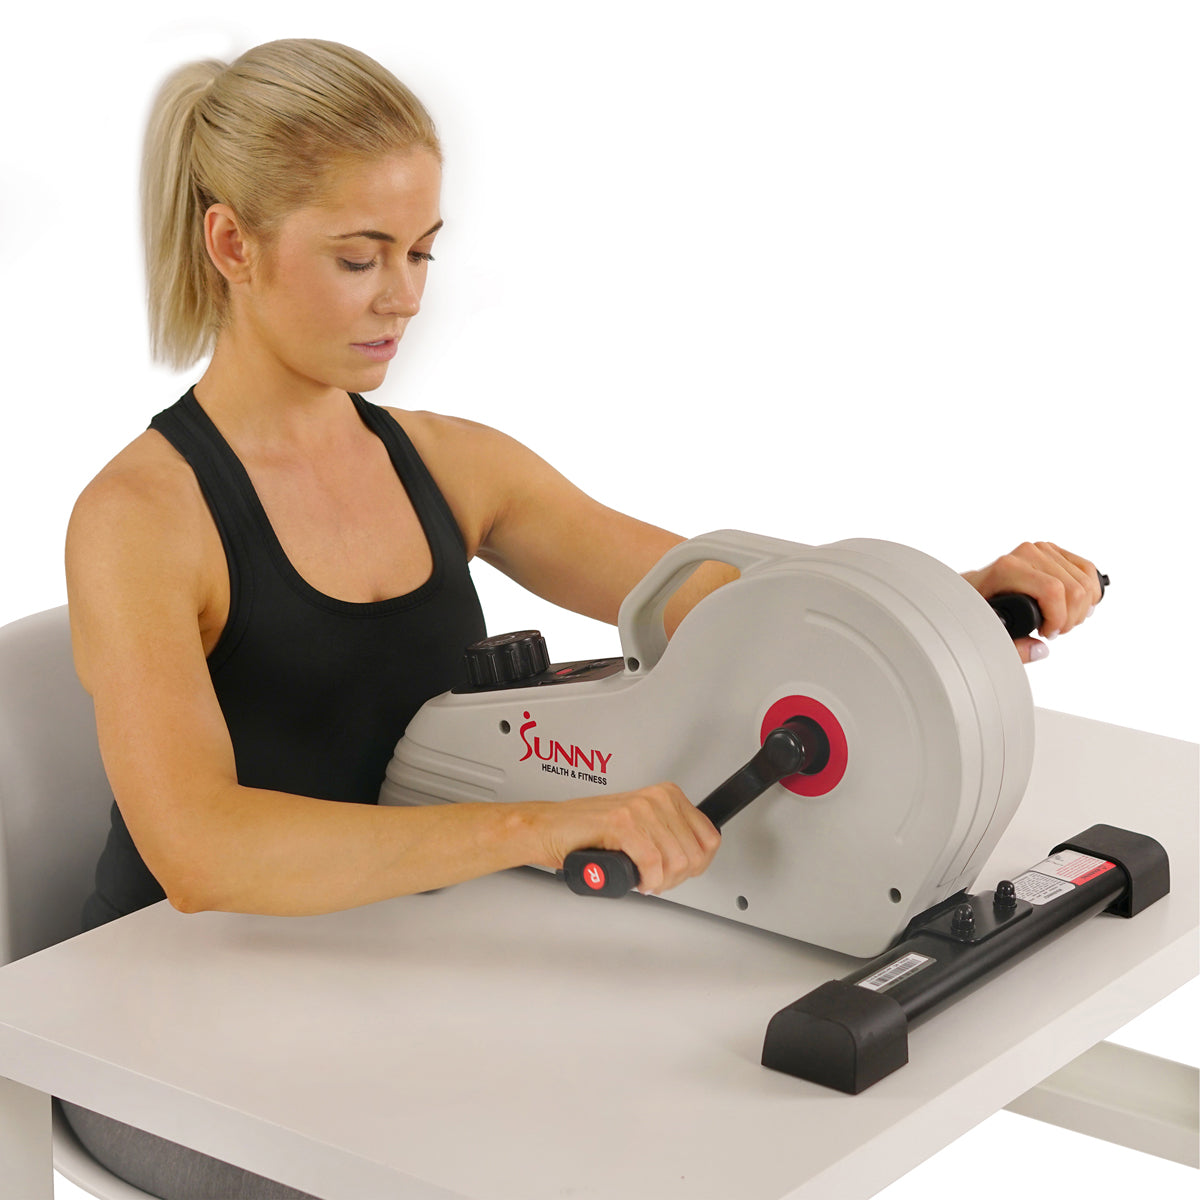 Multi Function Exercise Bench - 5 in 1 – Fasilite Athleisure